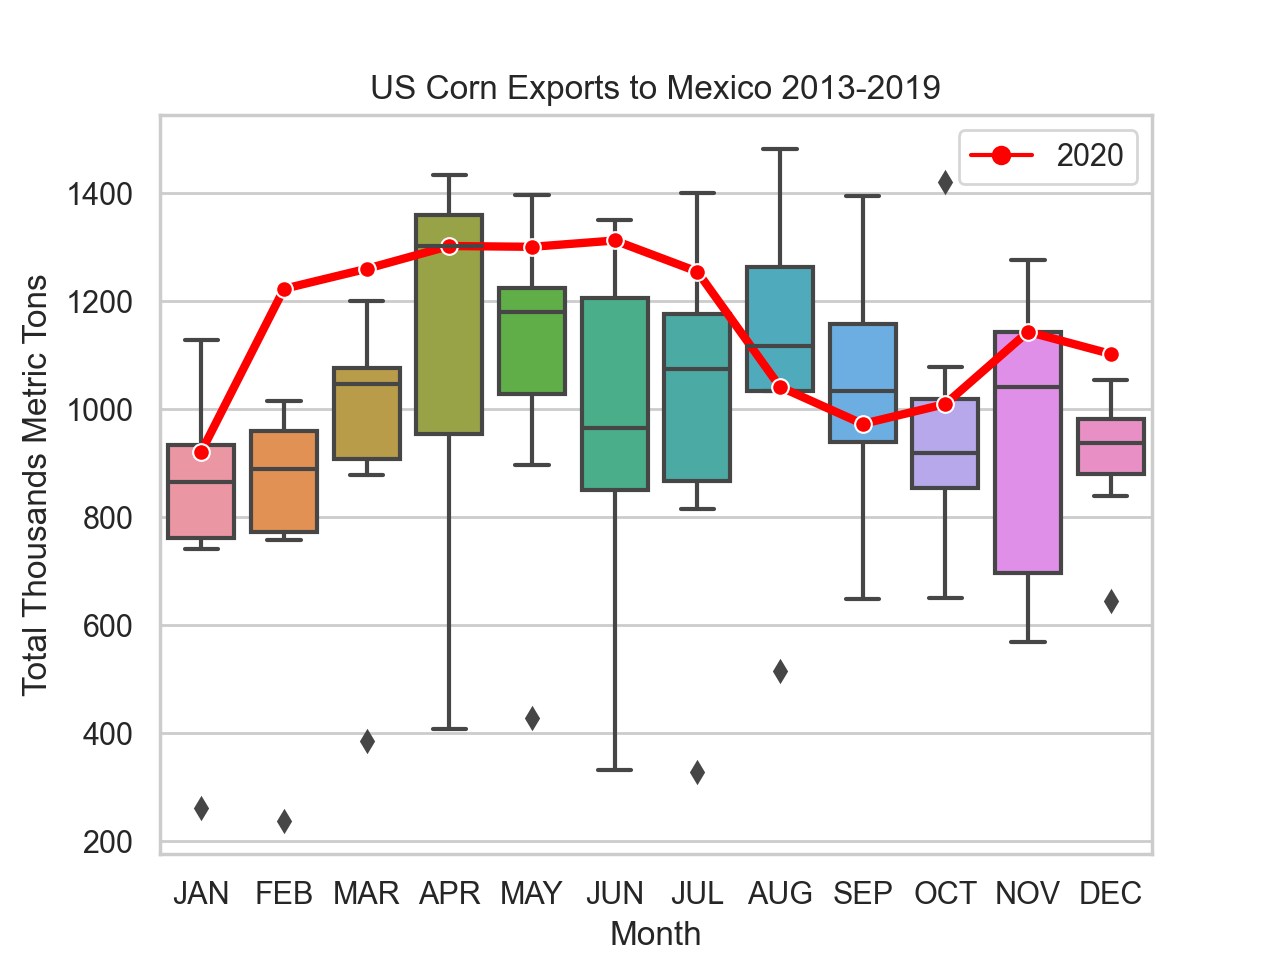 Figure 12: US Corn Exports to Mexico 2013-2019 VS 2020. Data source: USDA AMS Federal Grain Inspection Service, accessed at https://fgisonline.ams.usda.gov/ExportGrainReport/ on 2021-04-04.